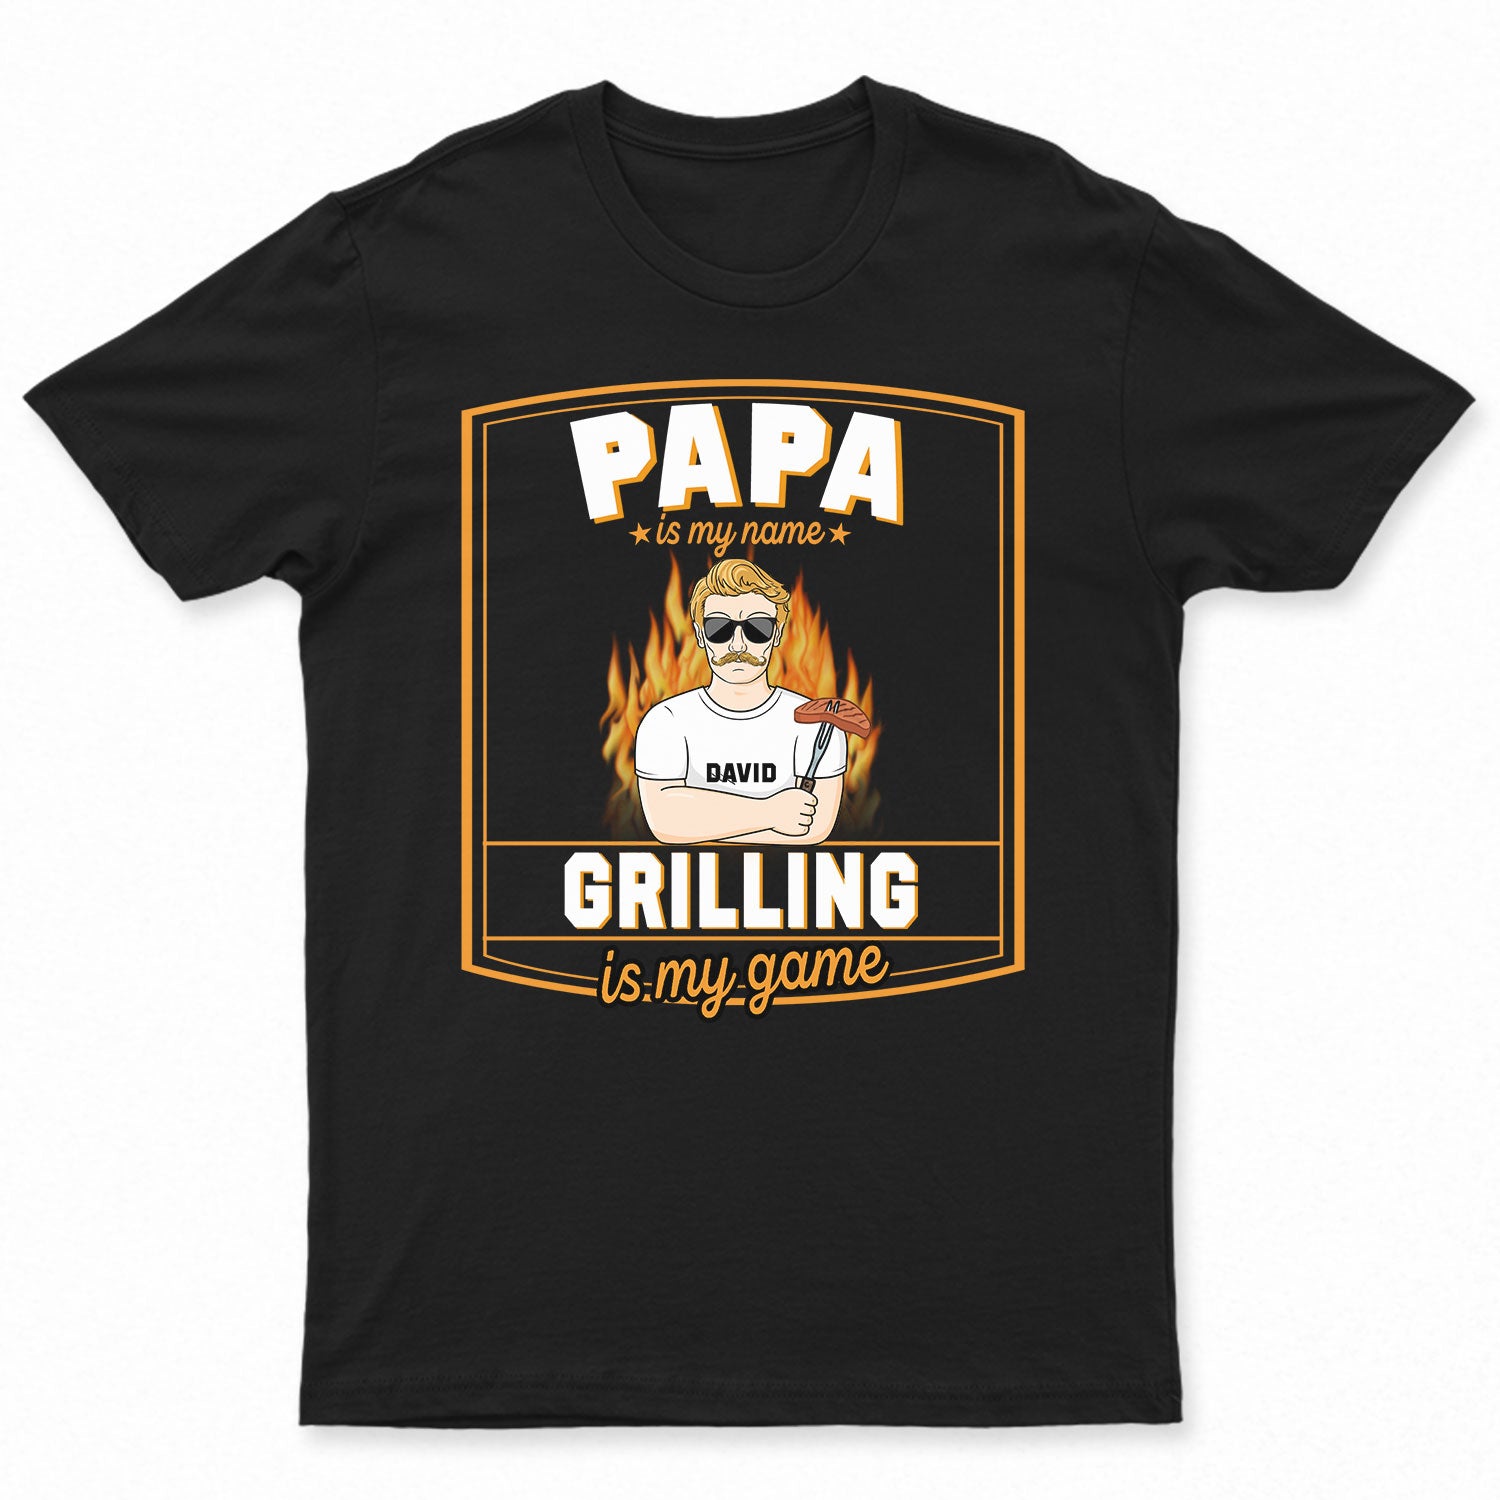 Grilling Is My Game - Birthday, Loving Gift For Dad, Daddy, Father, Grandfather, Grandpa, Husband, Men - Personalized Custom T Shirt